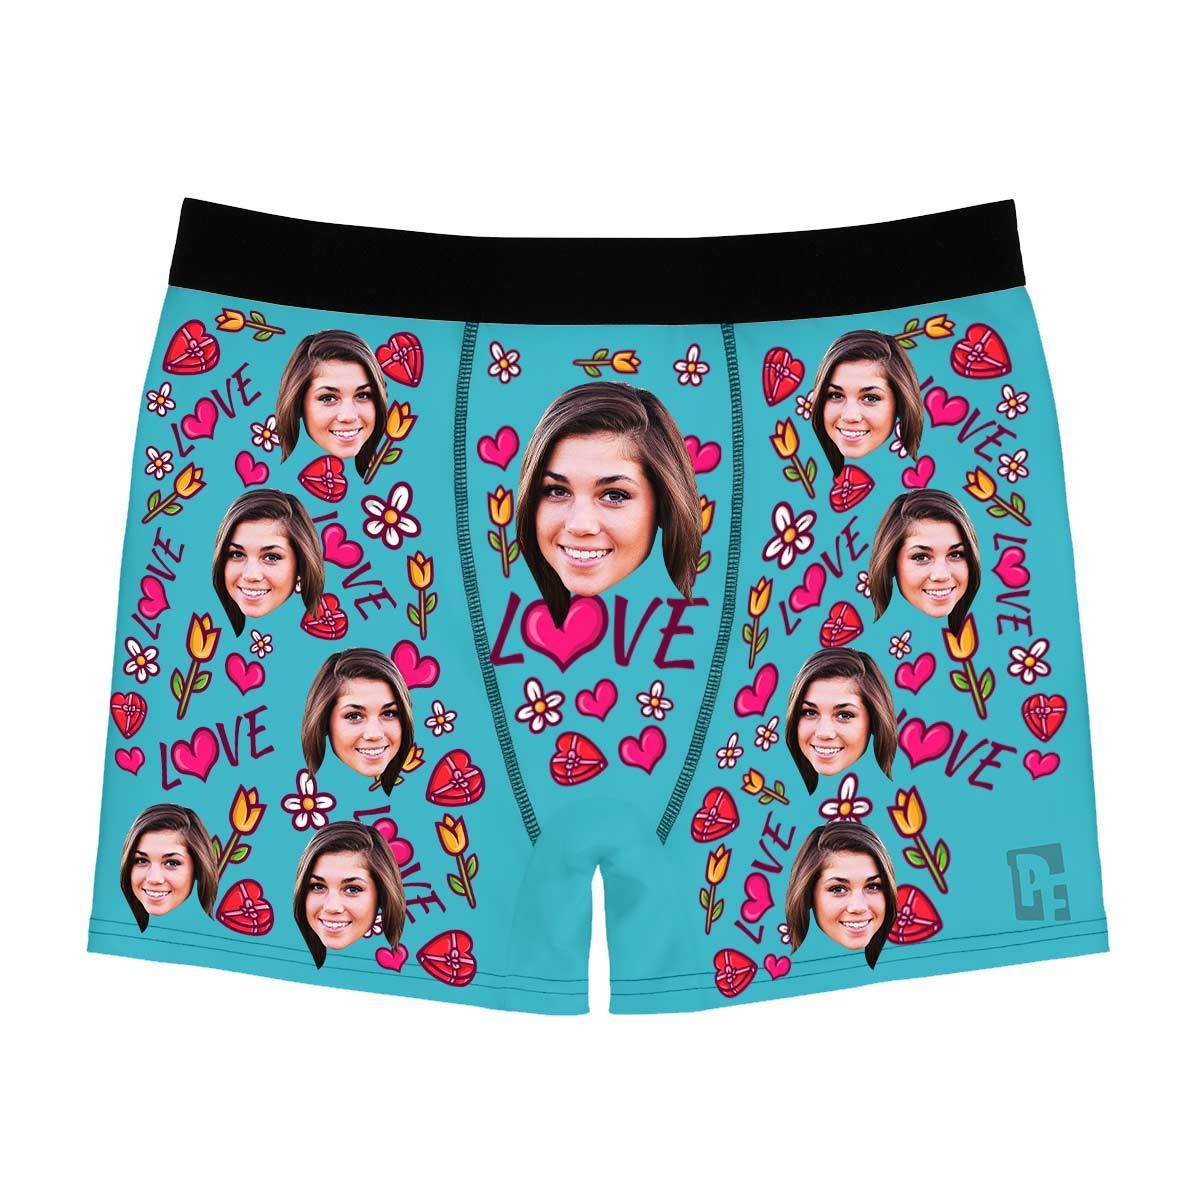 Blue Hearts and Flowers men's boxer briefs personalized with photo printed on them